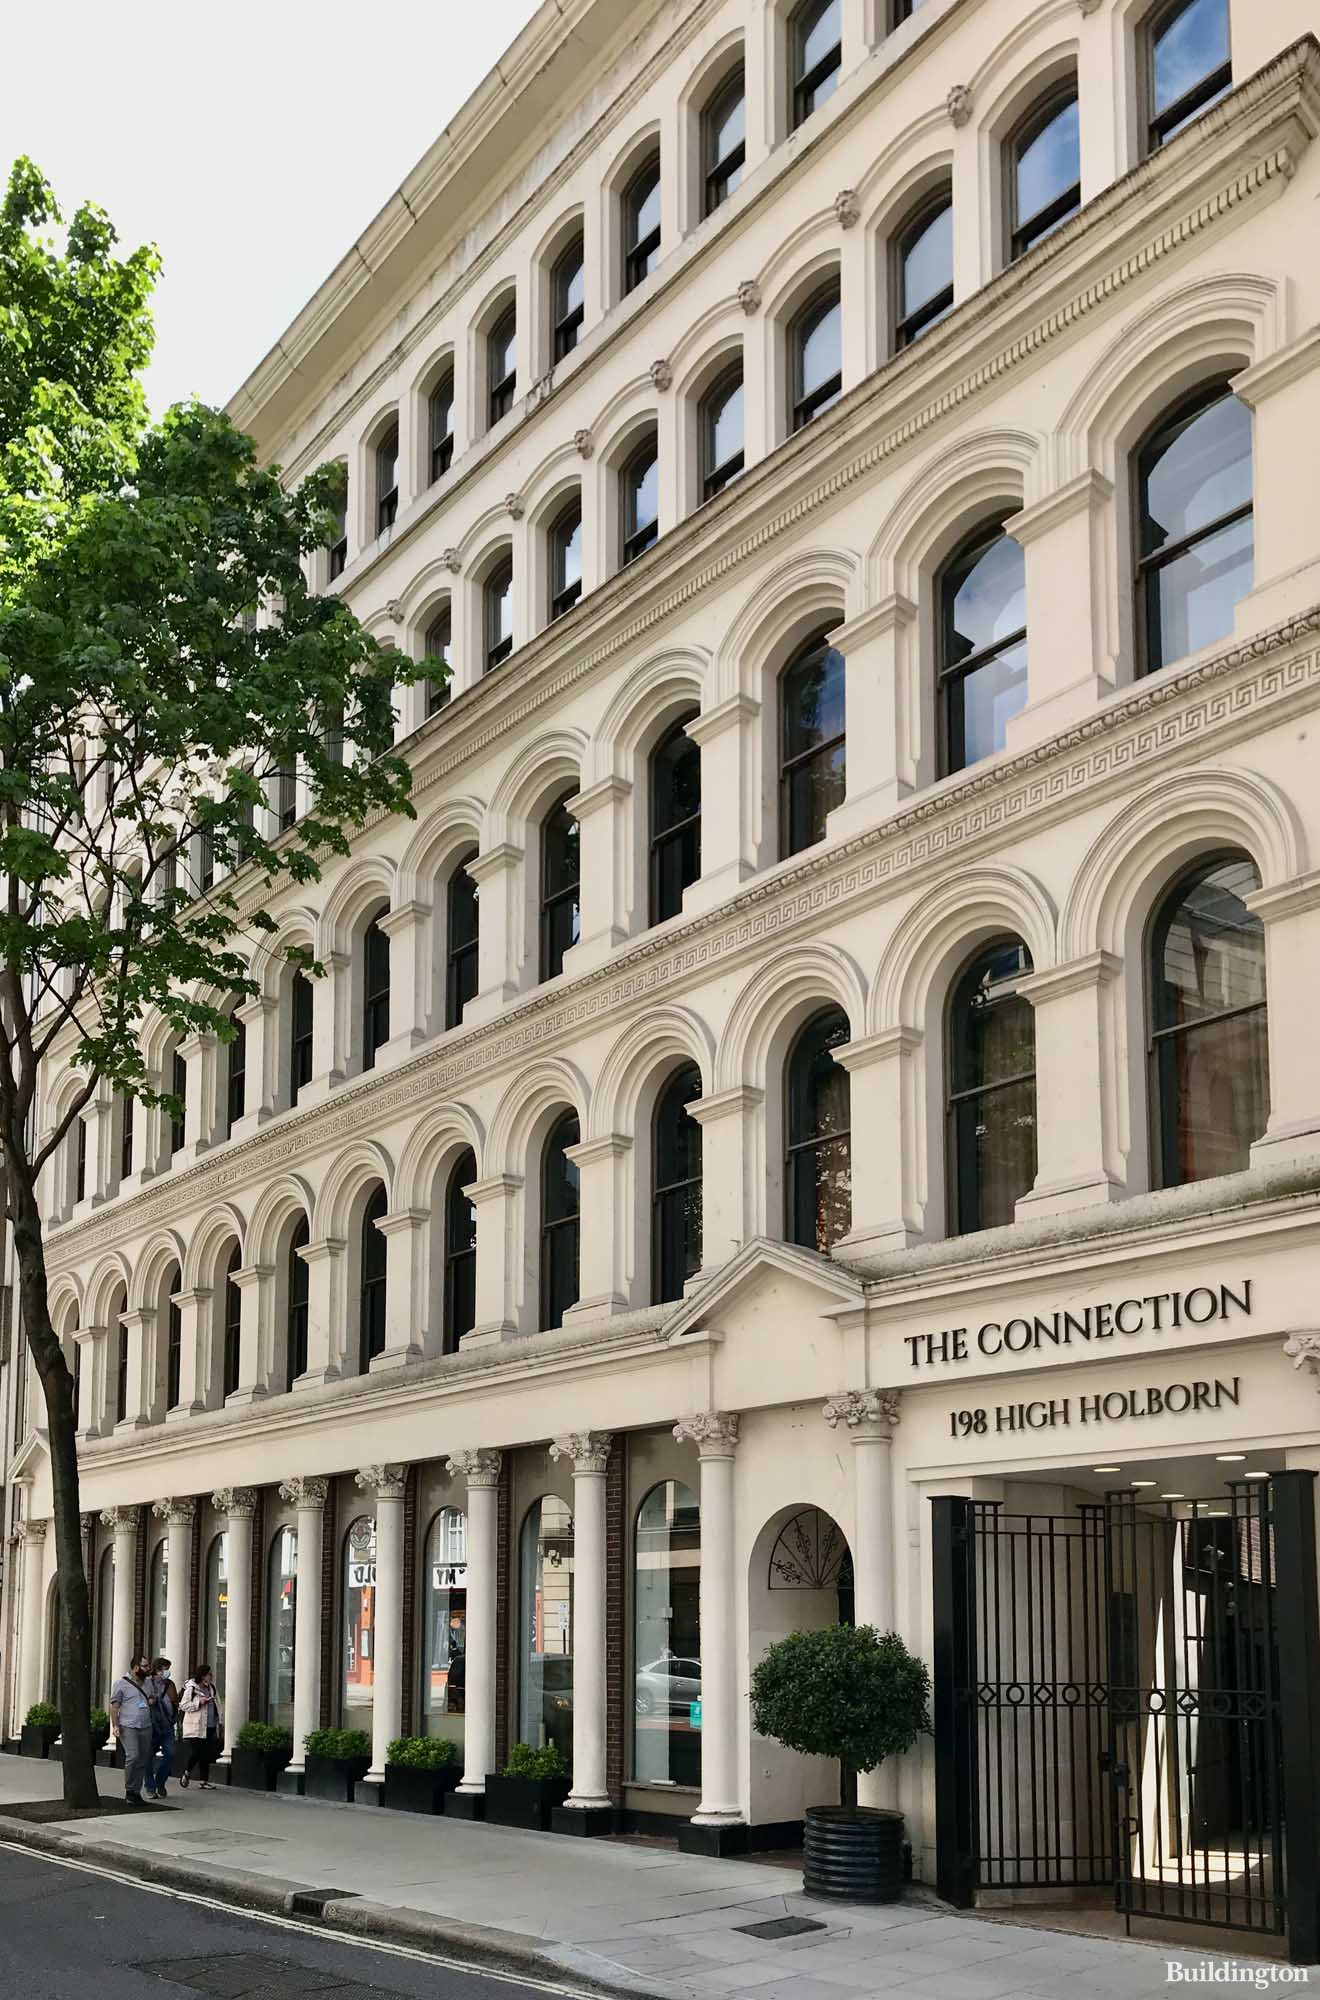 The Connection 198 High Holborn building in London WC1.